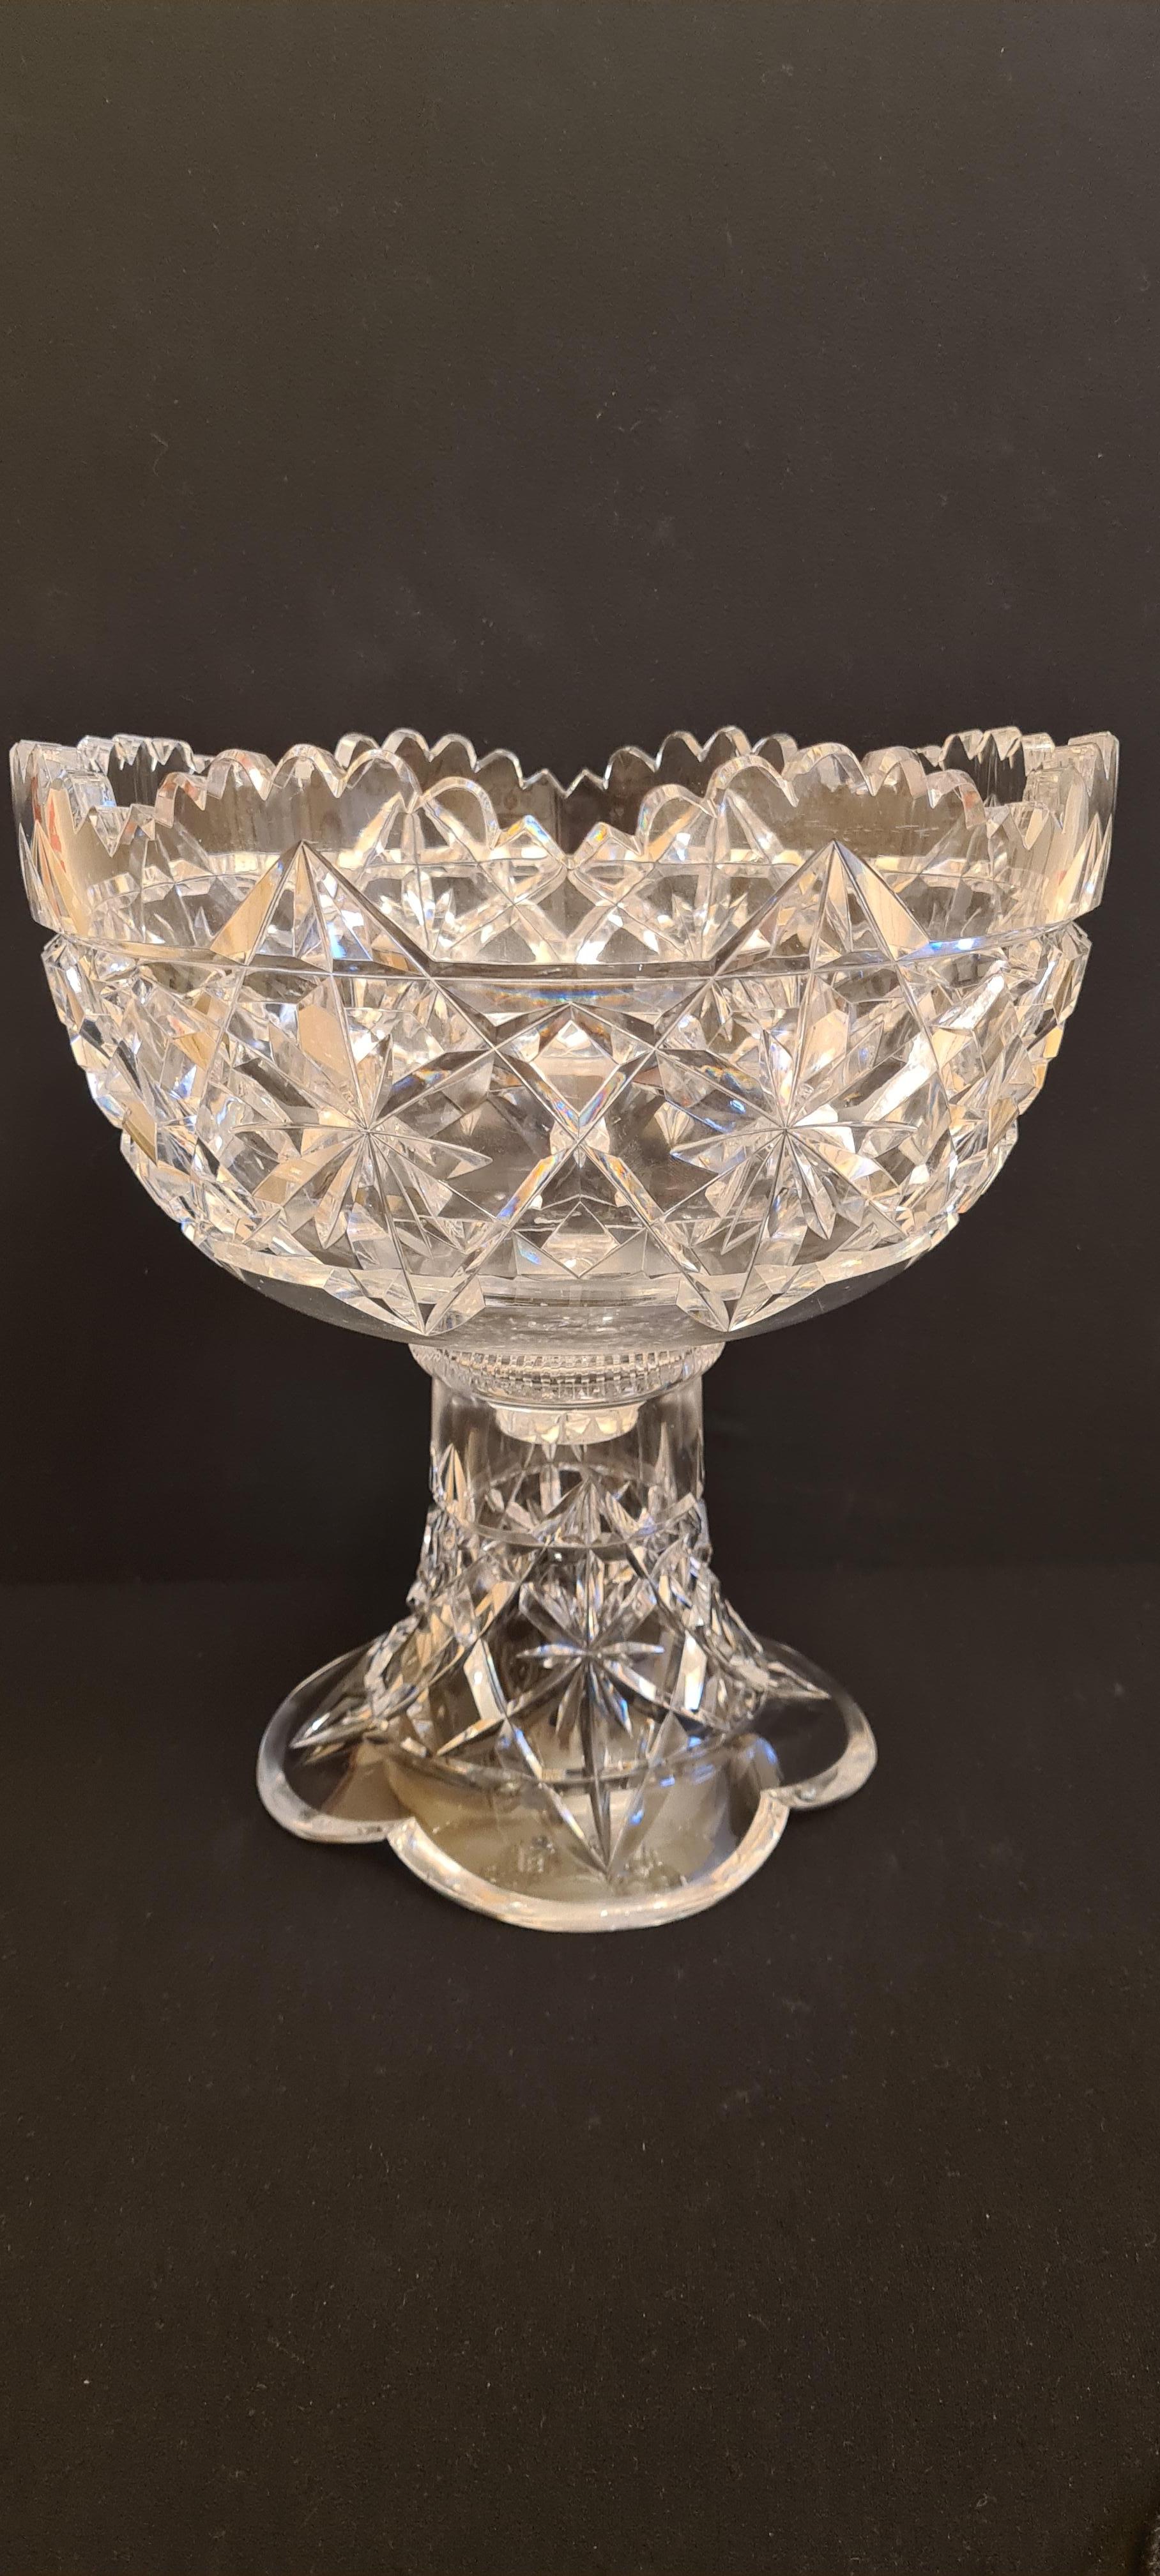 Amazing antique American Brilliant cut crystal punch bowl by Hawks & Co.; Years 1880-1900. 
This cut crystal two piece punch bowl, stand and bowl by T.G. Hawkes & Co. exibits the brilliant kings pattern. The kings pattern is the rarest of the